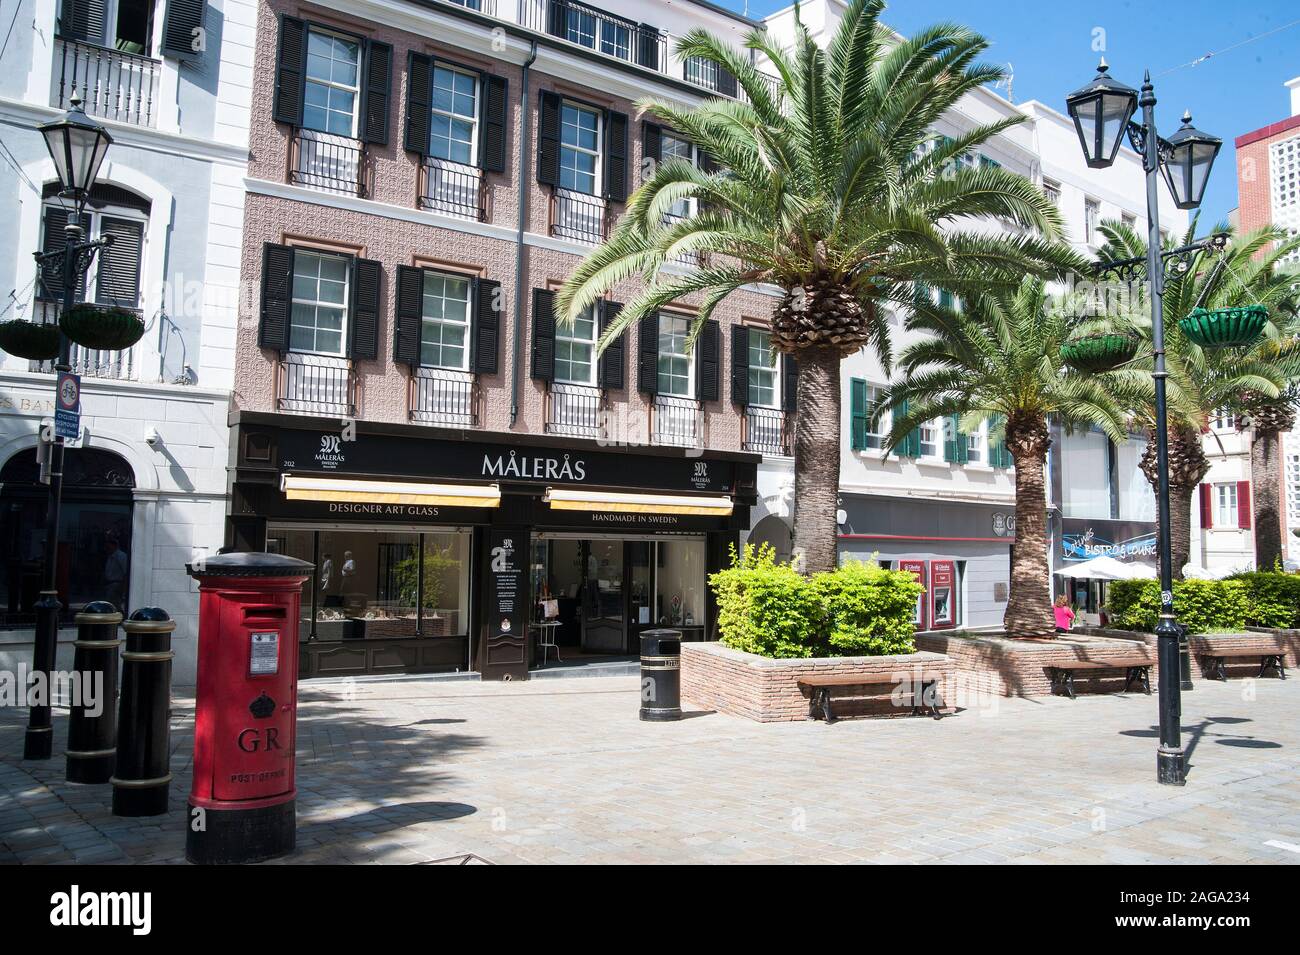 UK, Gibraltar: City centre. There are typical royal mail boxes. Stock Photo